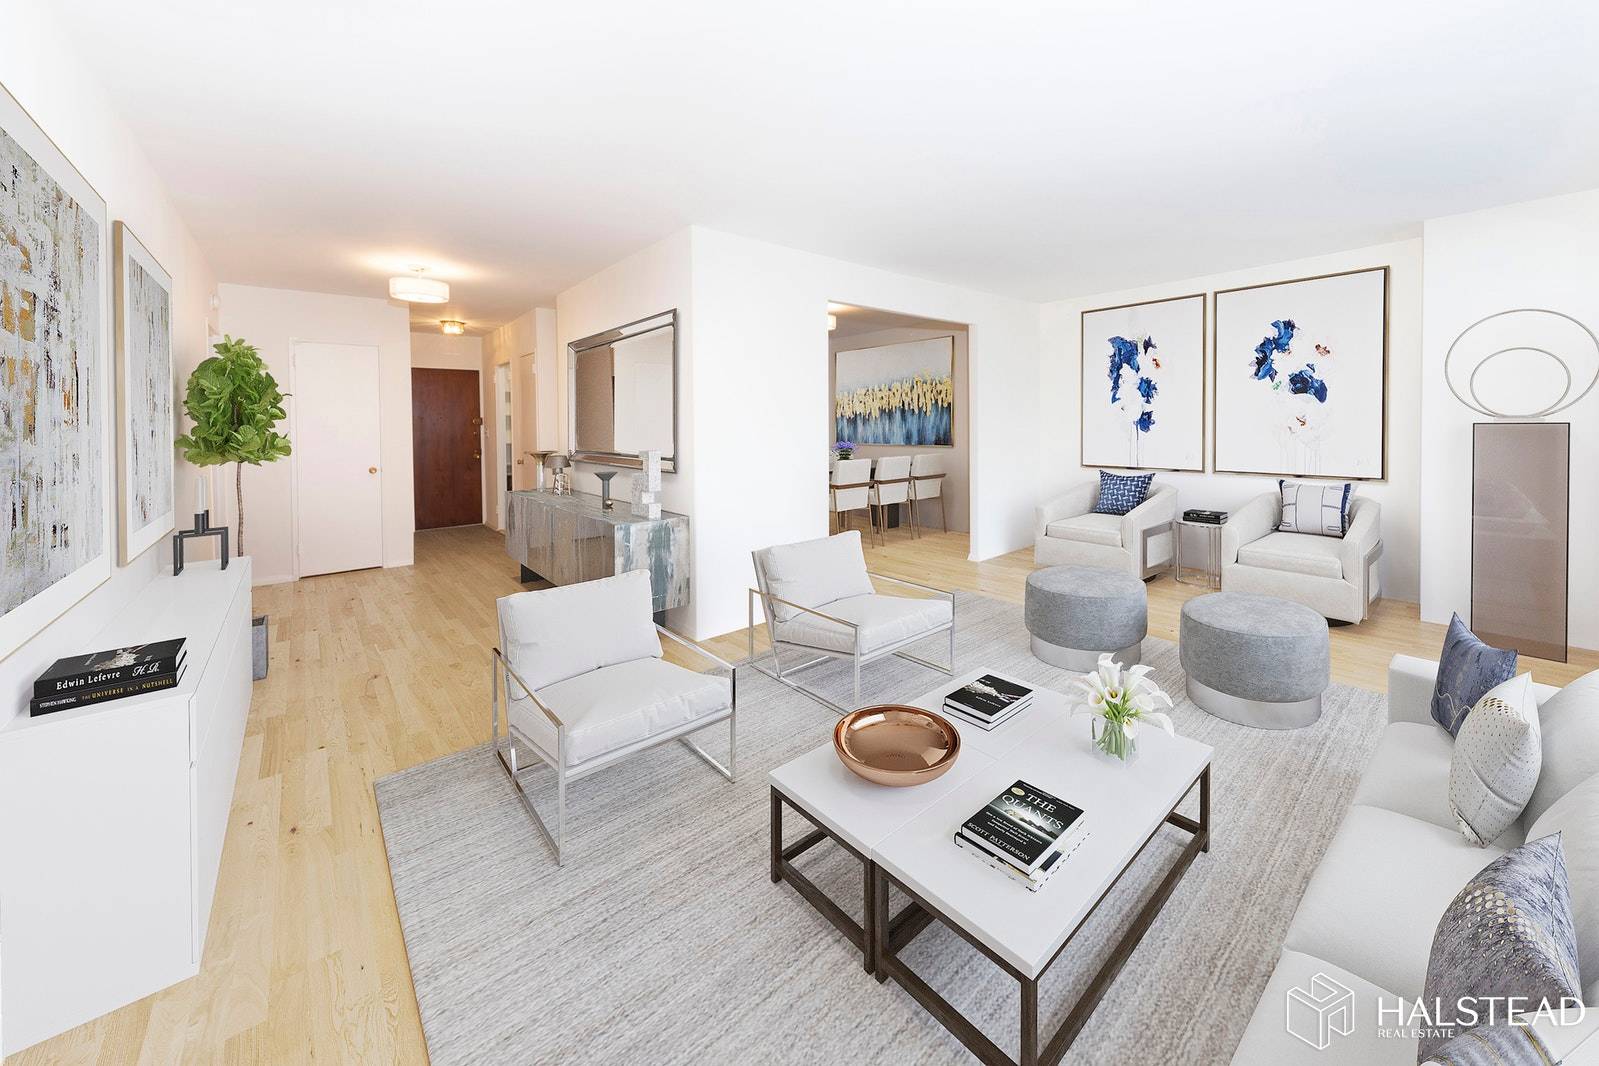 Take advantage of this opportunity to buy an 1100 square foot convertible 2 Bedroom apartment in a luxury building, at an unbelievably modest price and the lowest maintenance per square ...